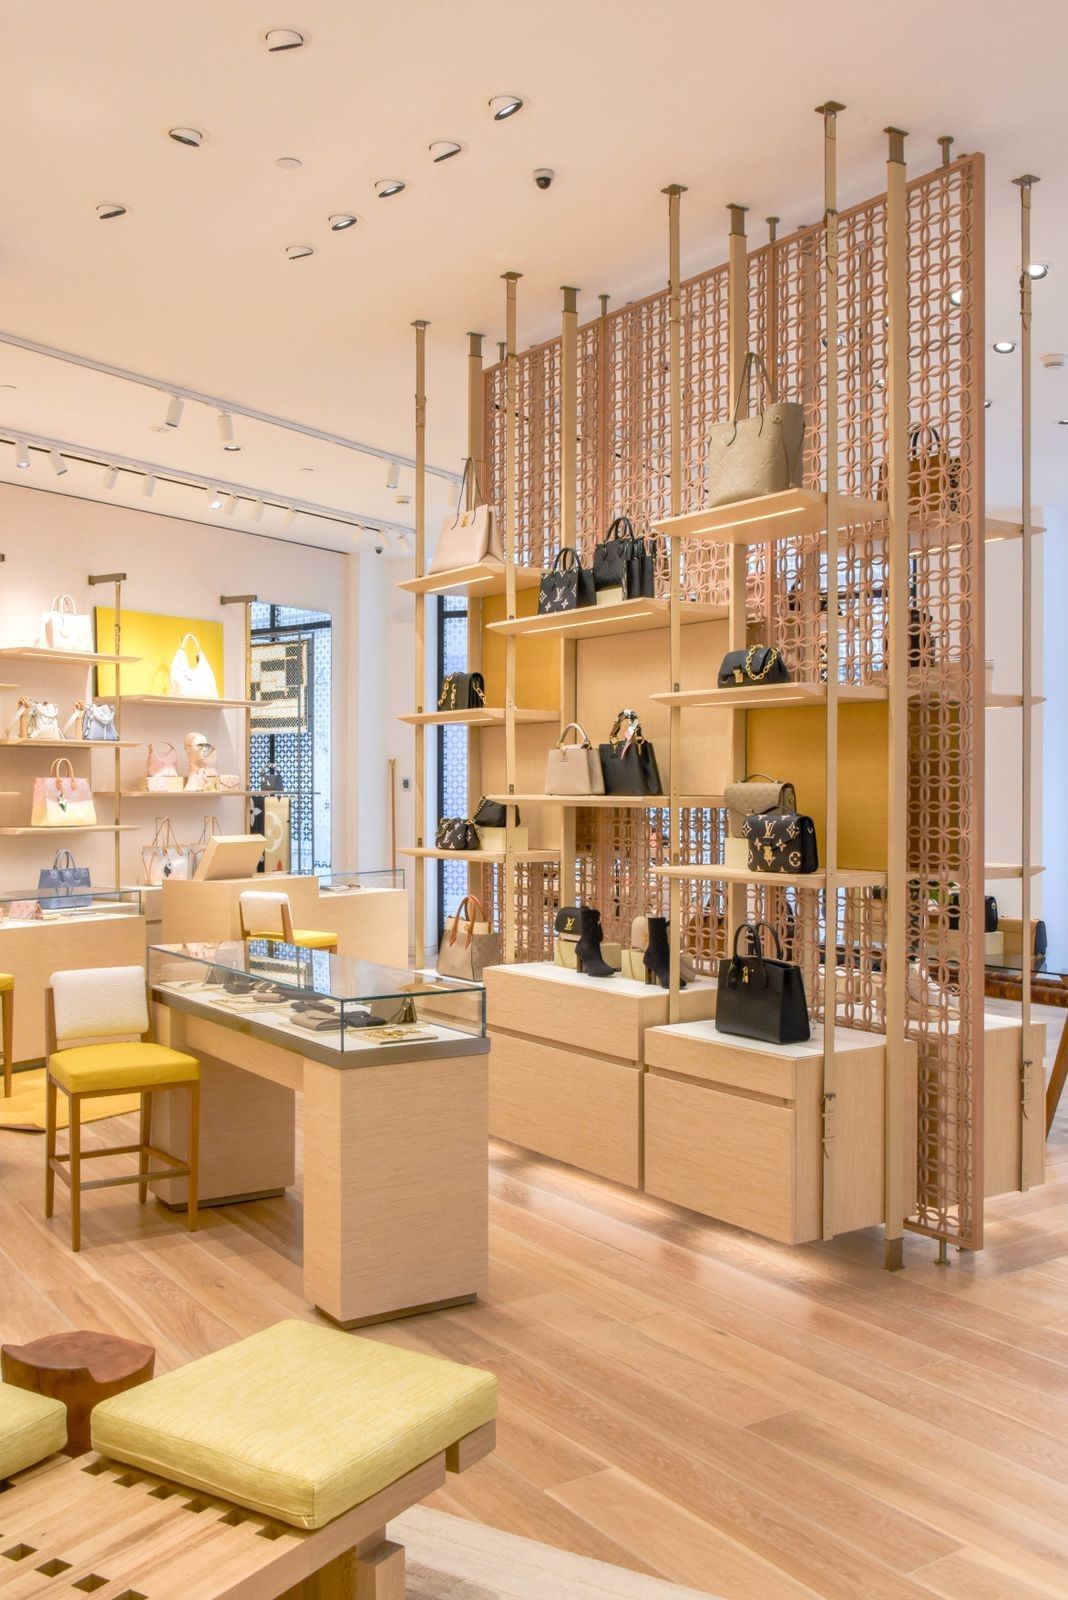 Louis Vuitton on X: #LouisVuitton comes to Lima. The Maison's first-ever  store in Peru is now open at Jockey Plaza featuring the latest collections,  including leather goods, accessories, and shoes. Find out